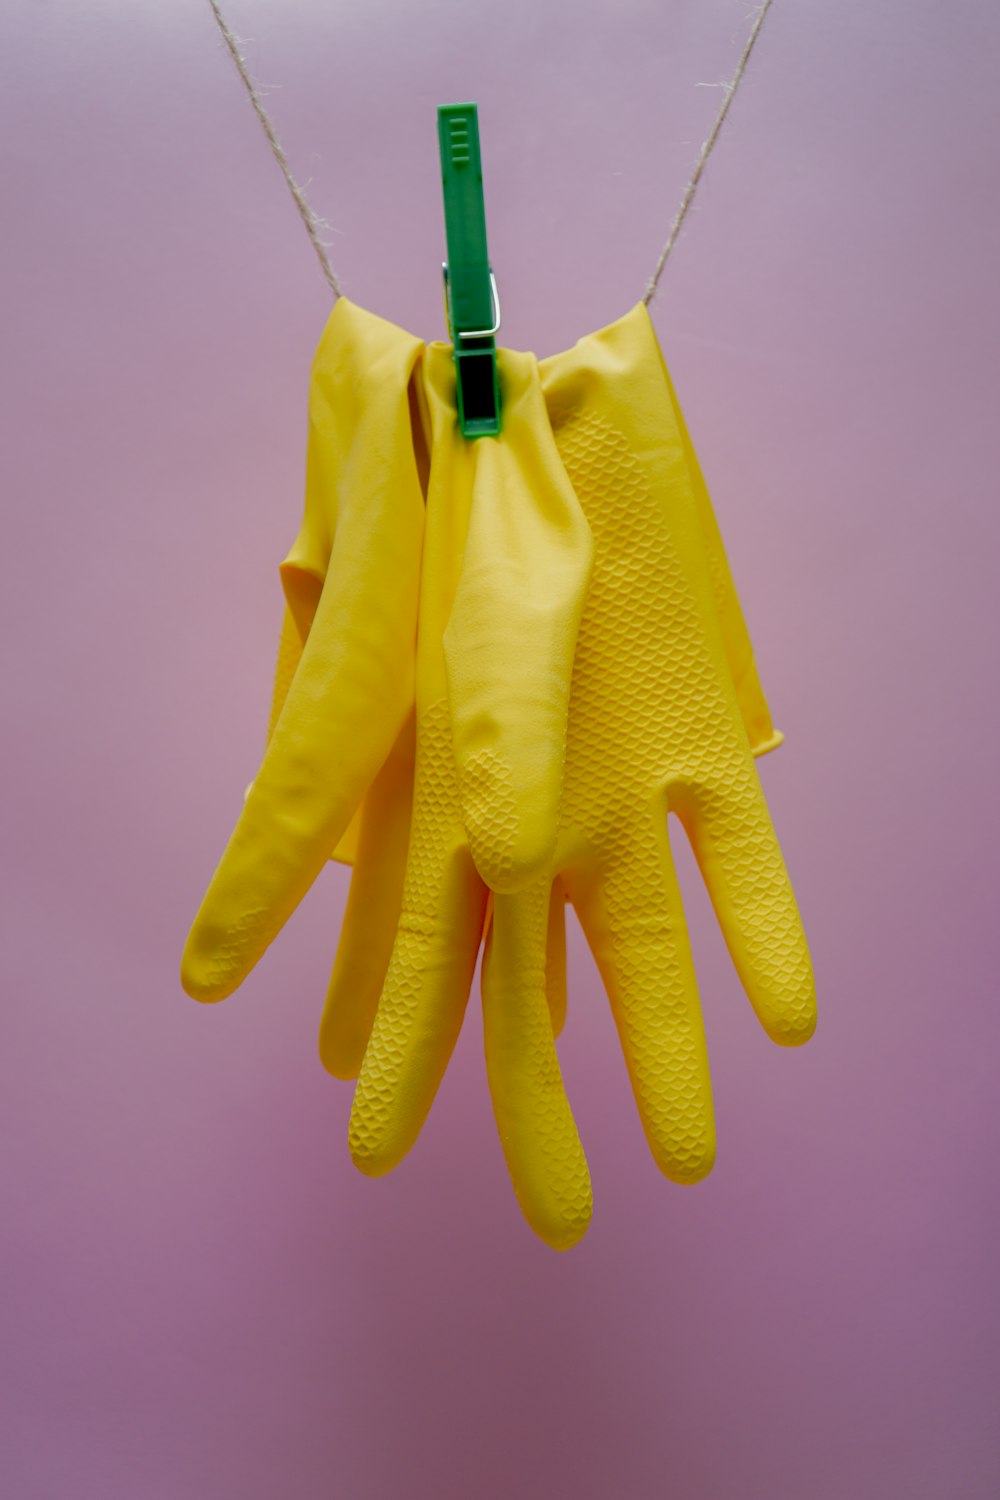 yellow rubber gloves on blue clothes hanger - how to get husky hair out of car?